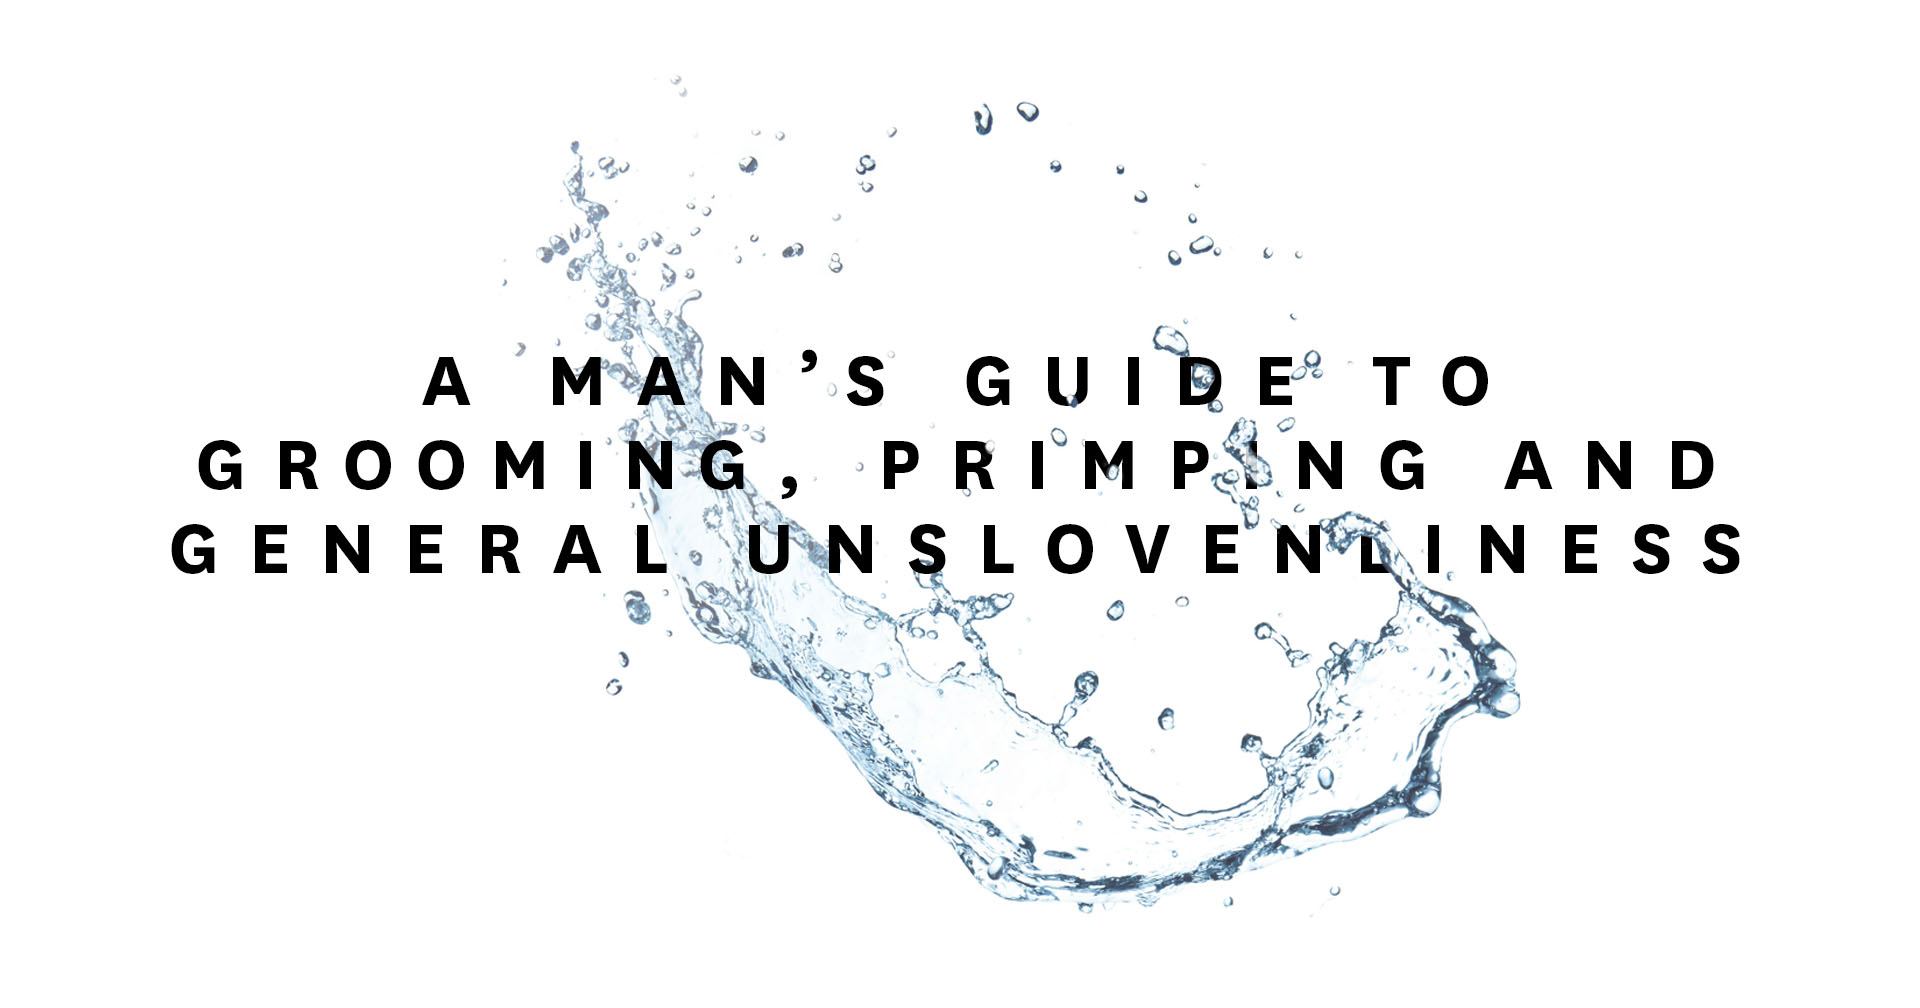 A Man’s Guide to Grooming, Primping and General Unslovenliness